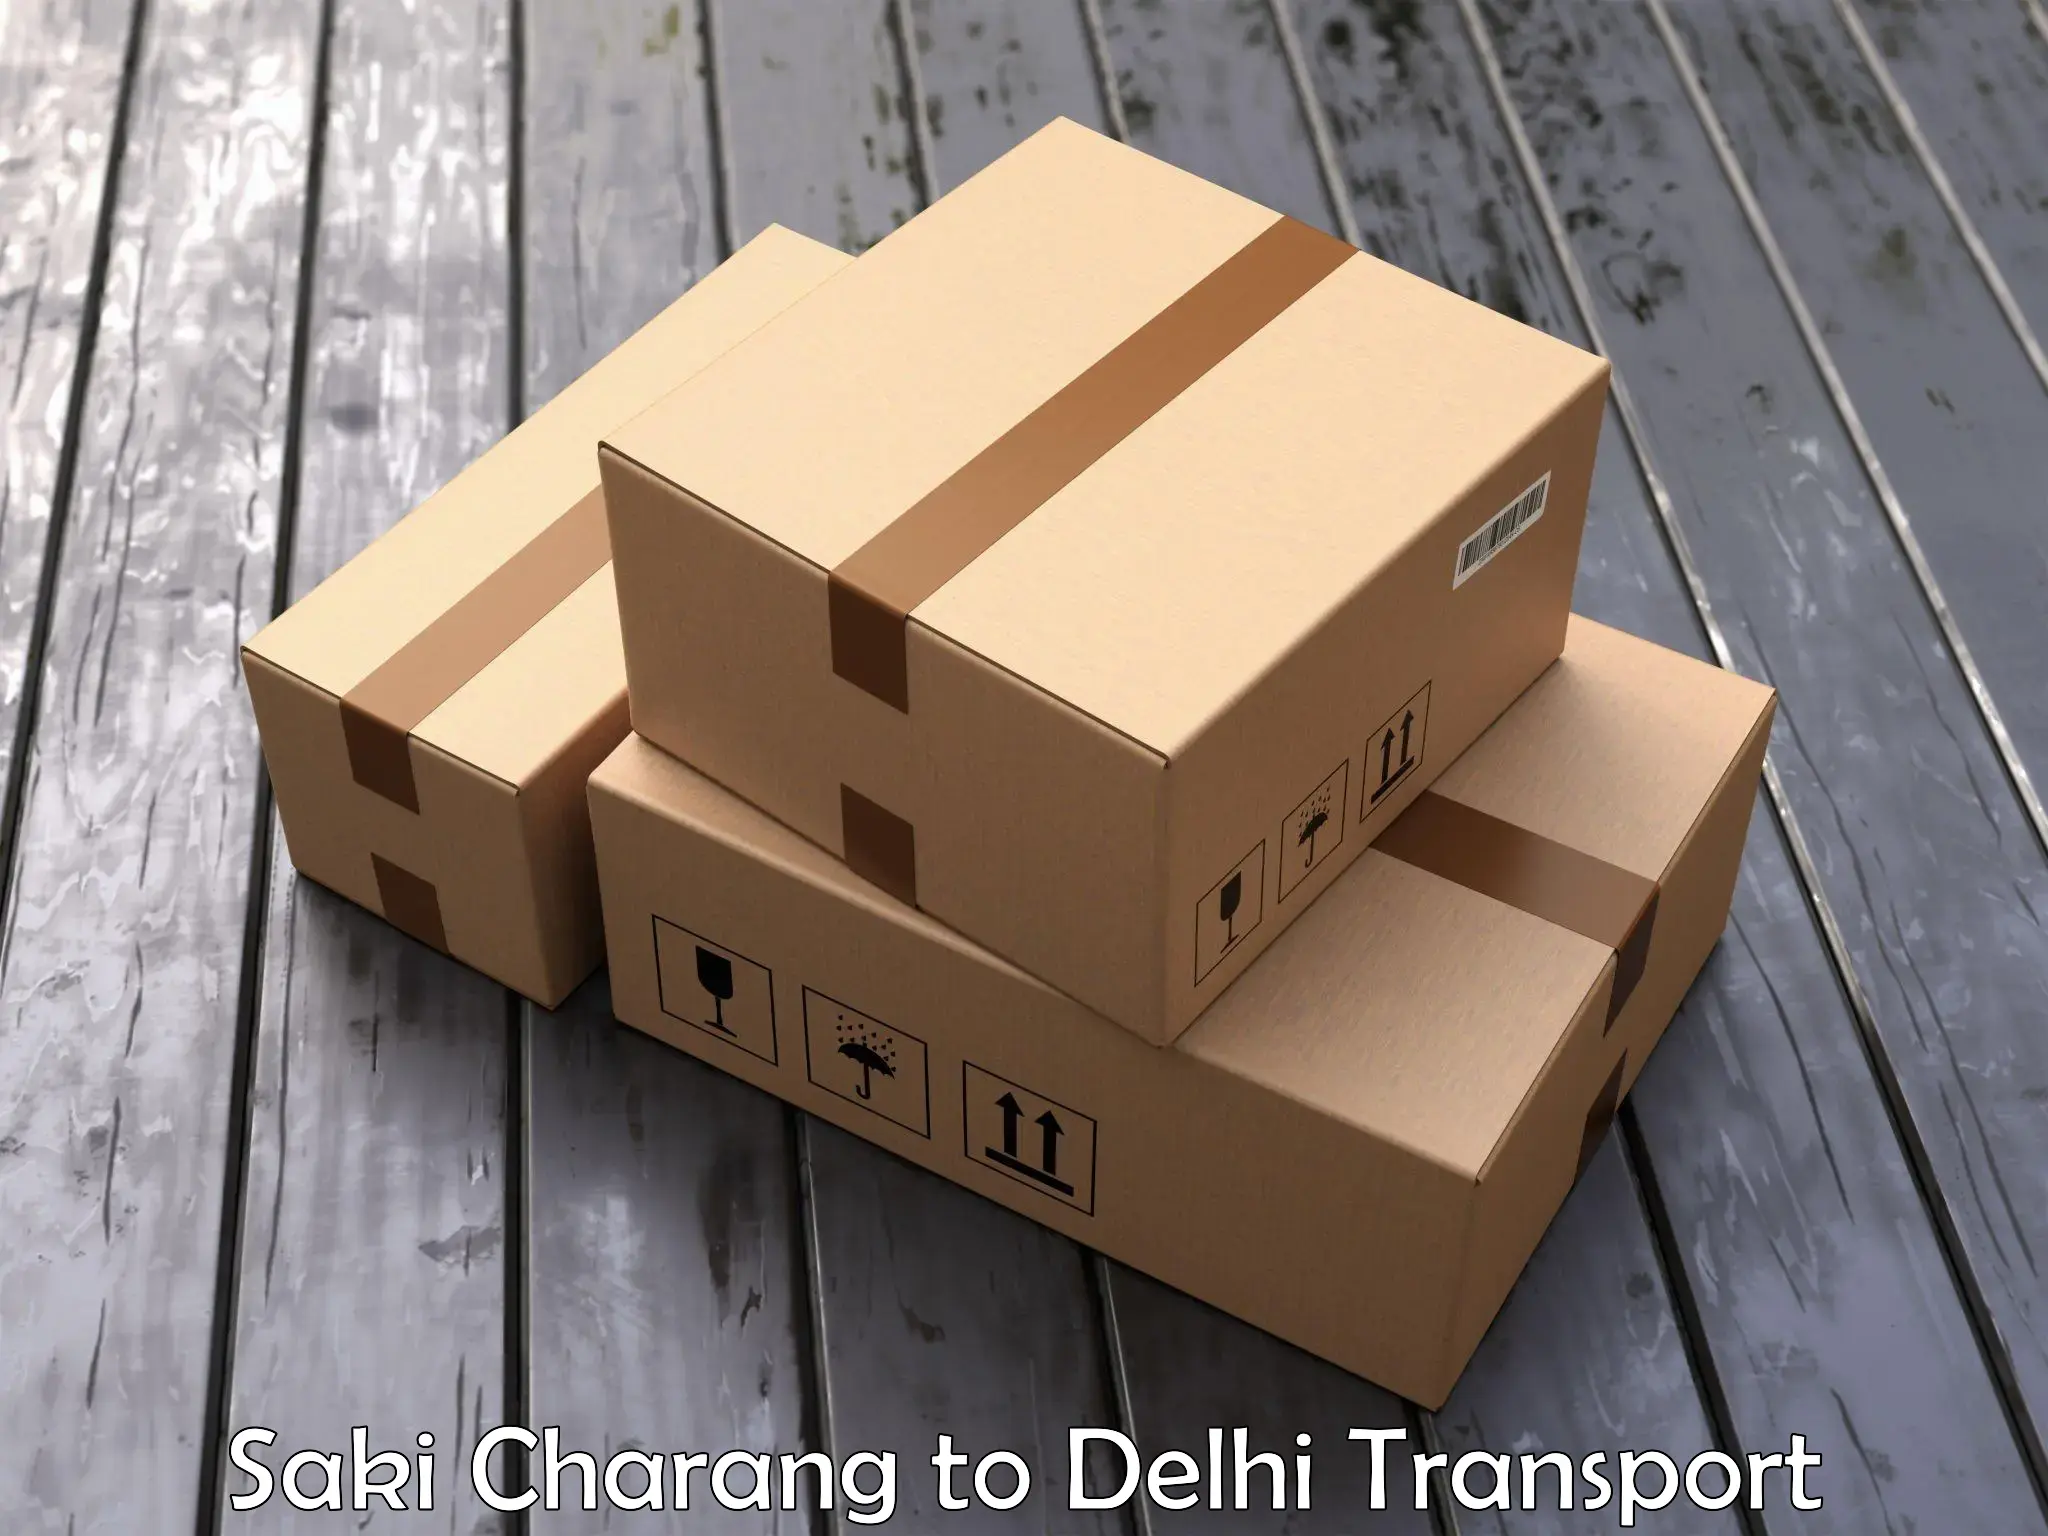 Truck transport companies in India Saki Charang to NCR